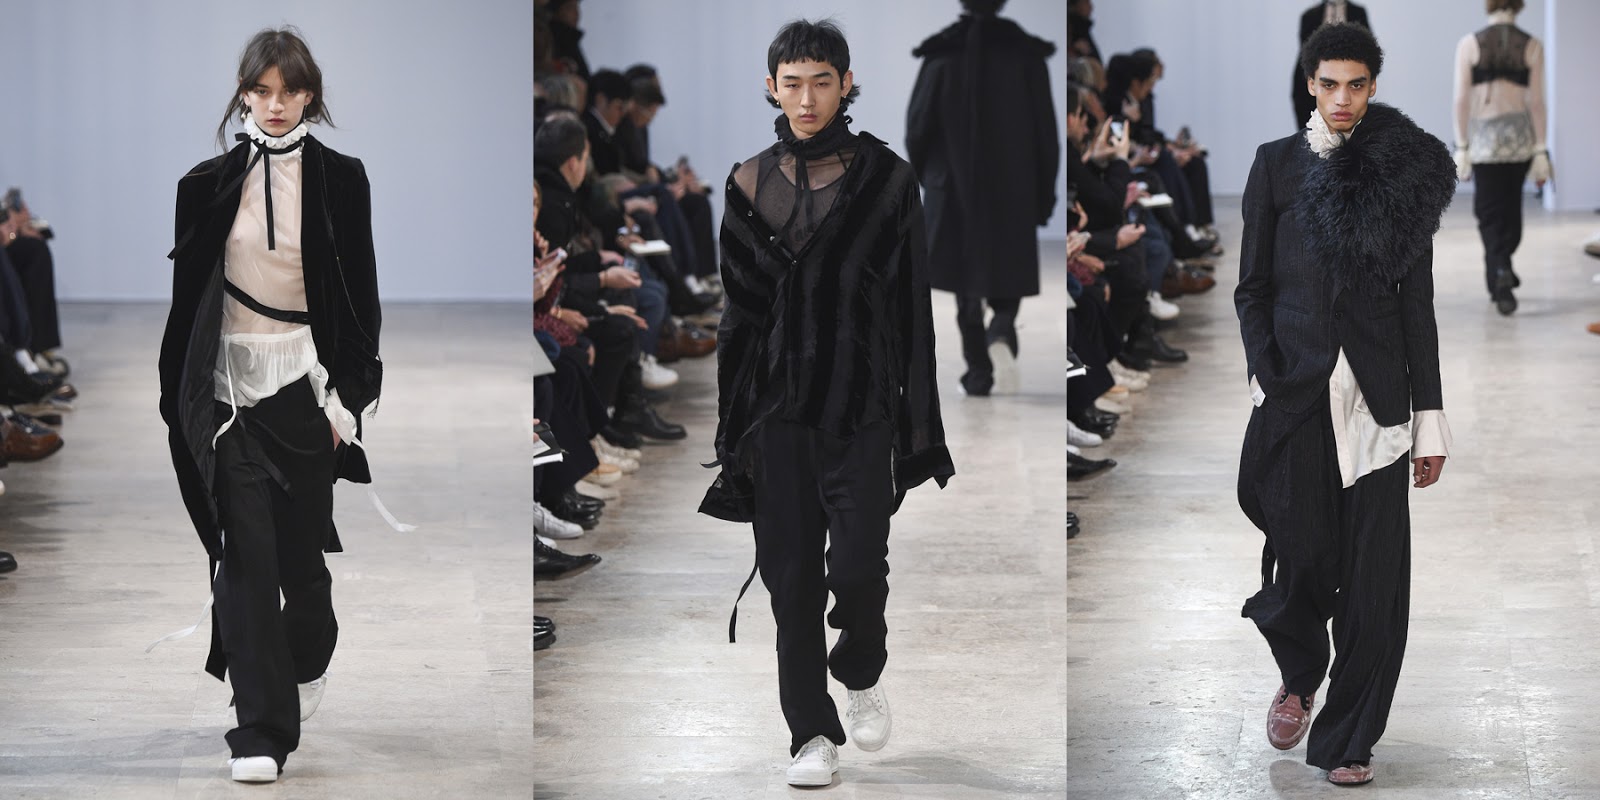 Ann Demeulemeester - A/W 2017 | In search of the Missing Light